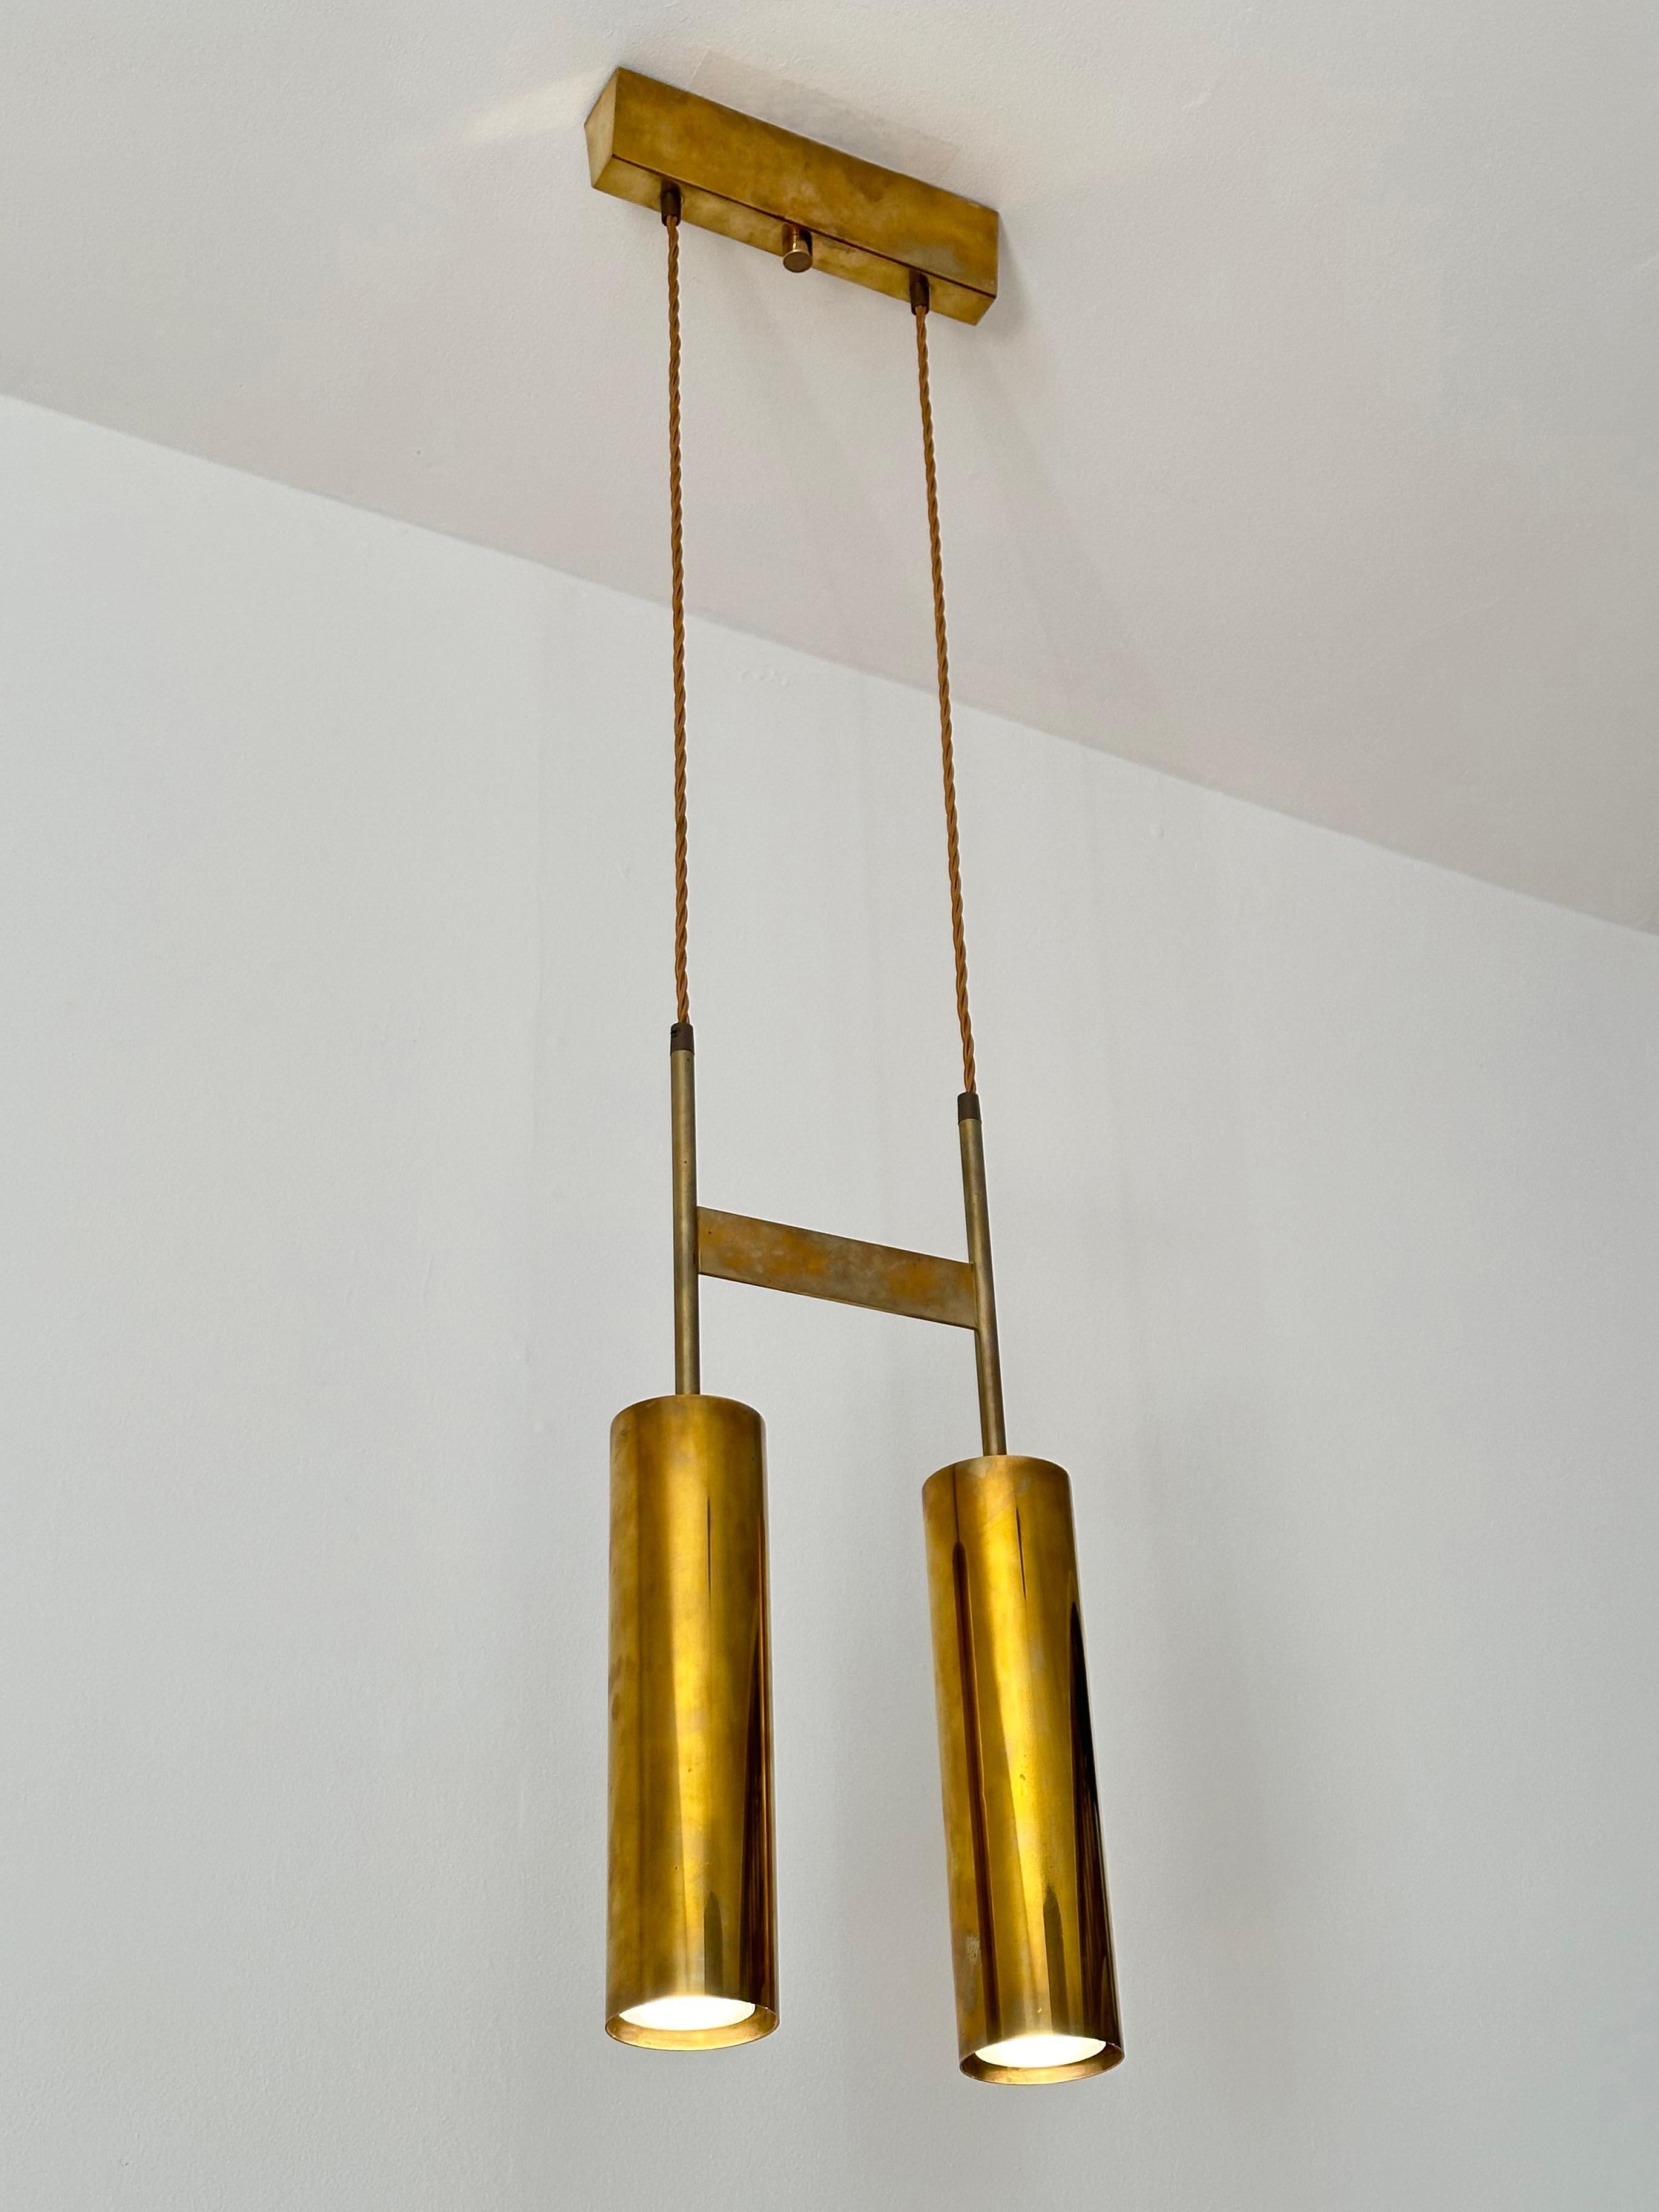 Modernist Solid Brass Double Cylinder Pendant Light Fixture, 1960s  In Good Condition For Sale In Brooklyn, NY